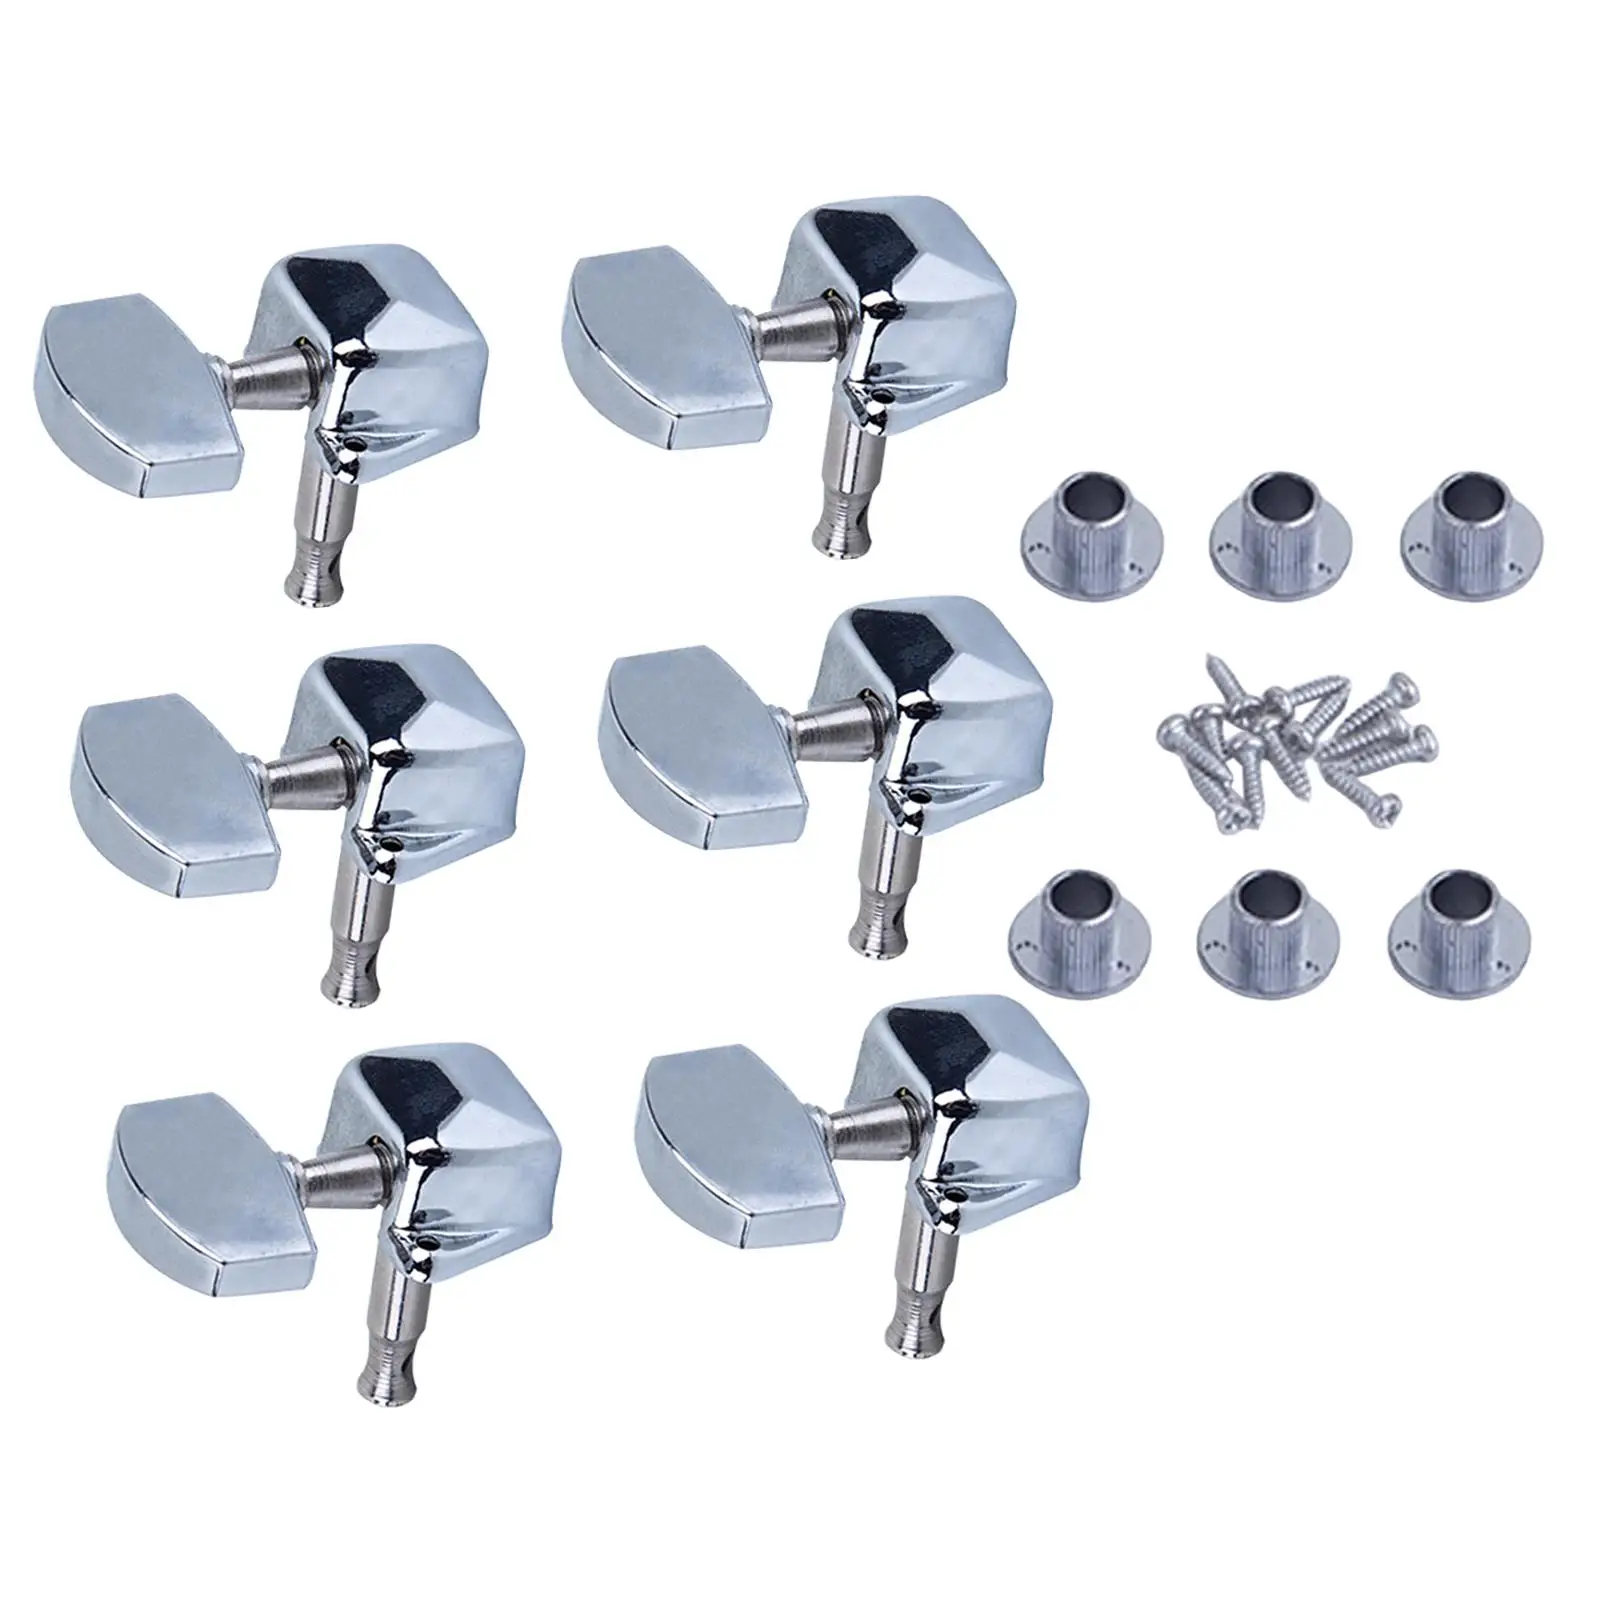 6x Guitar String Tuning Key Pegs Tuners Set 3Right3Left for Electric Classic Acoustic Guitar Bass